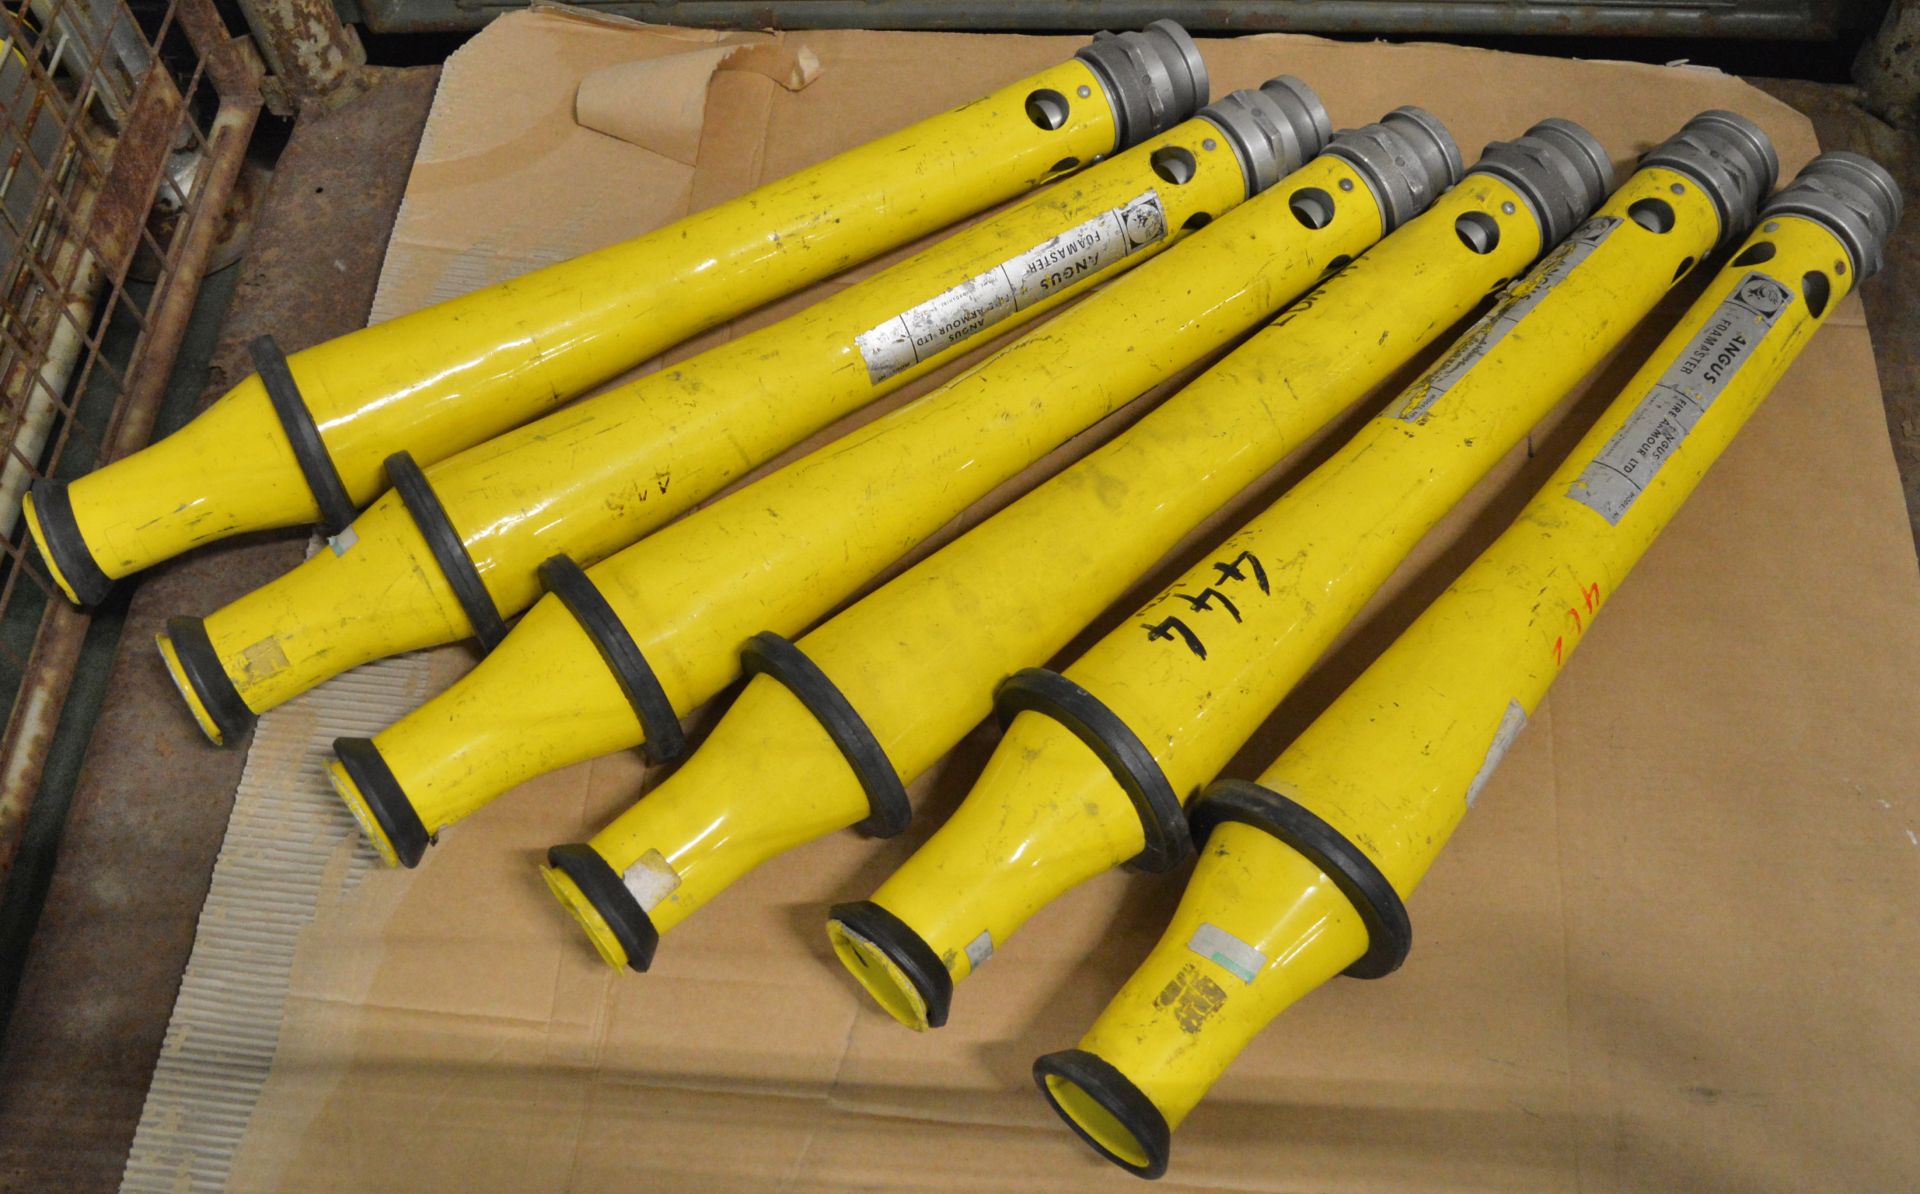 6x Angus Foamaster Nozzles. - Image 2 of 2